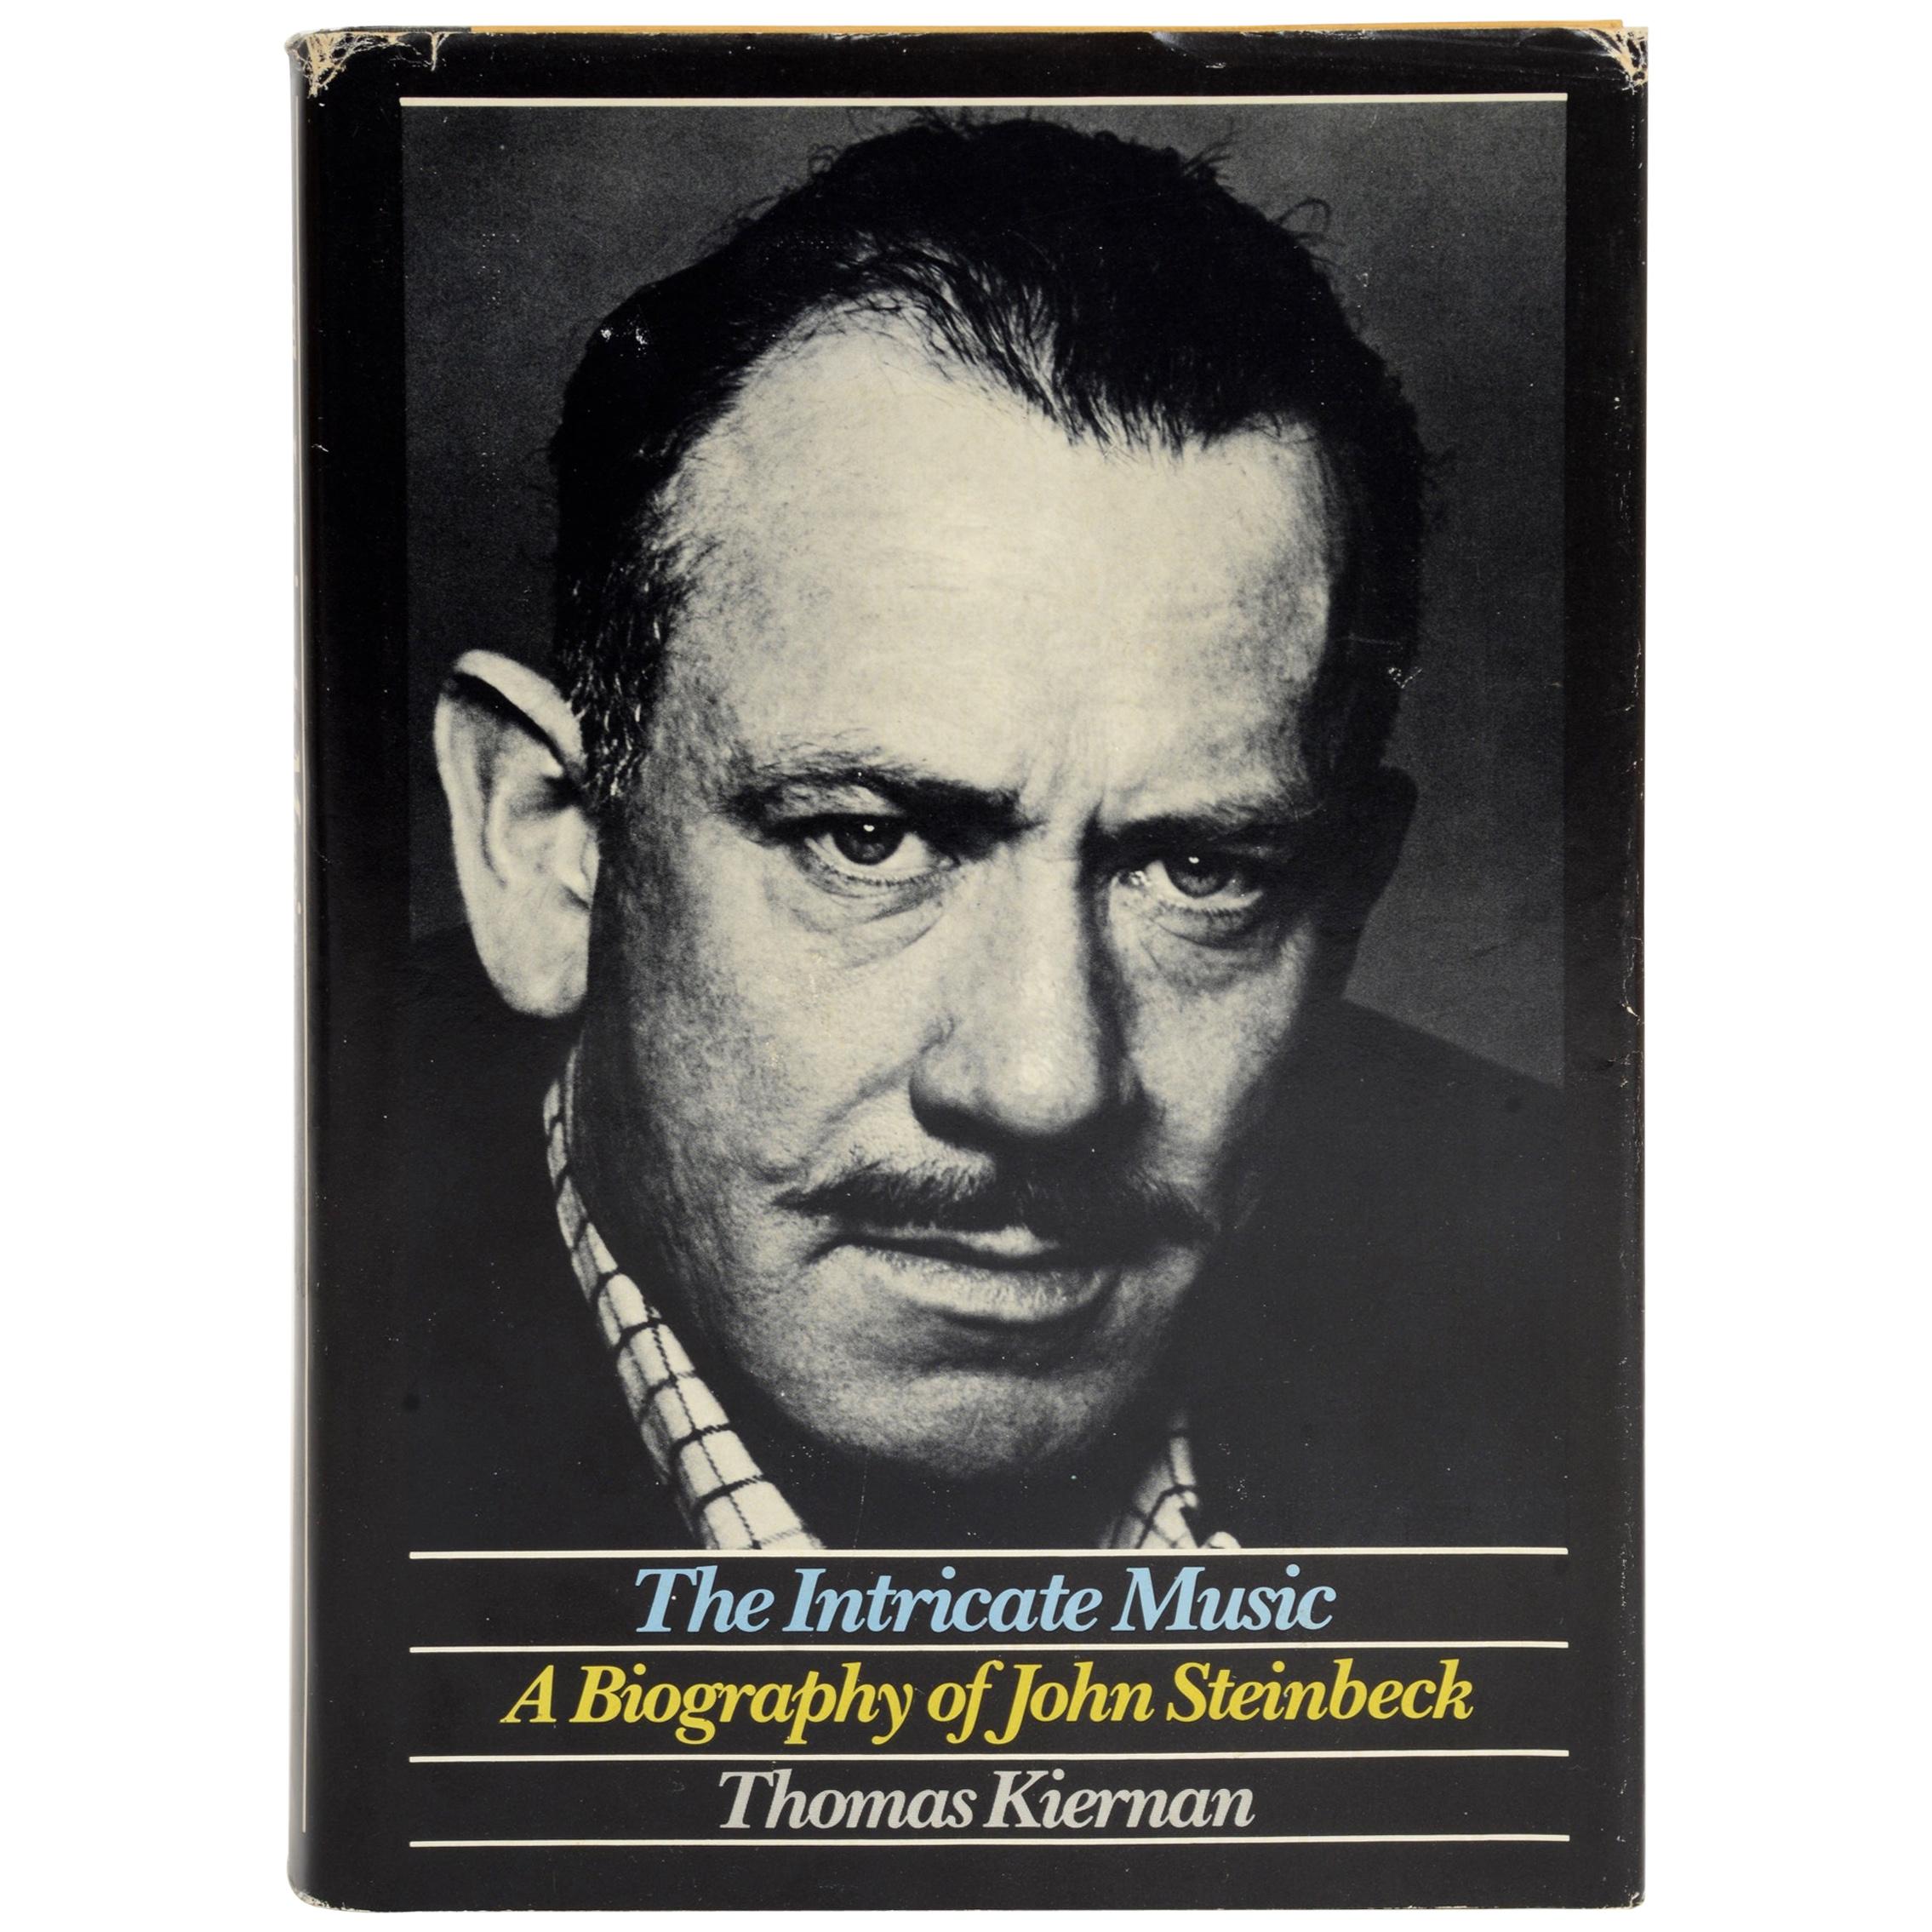 The Intricate Music A Biography of John Steinbeck, Signed & Stated First Edition